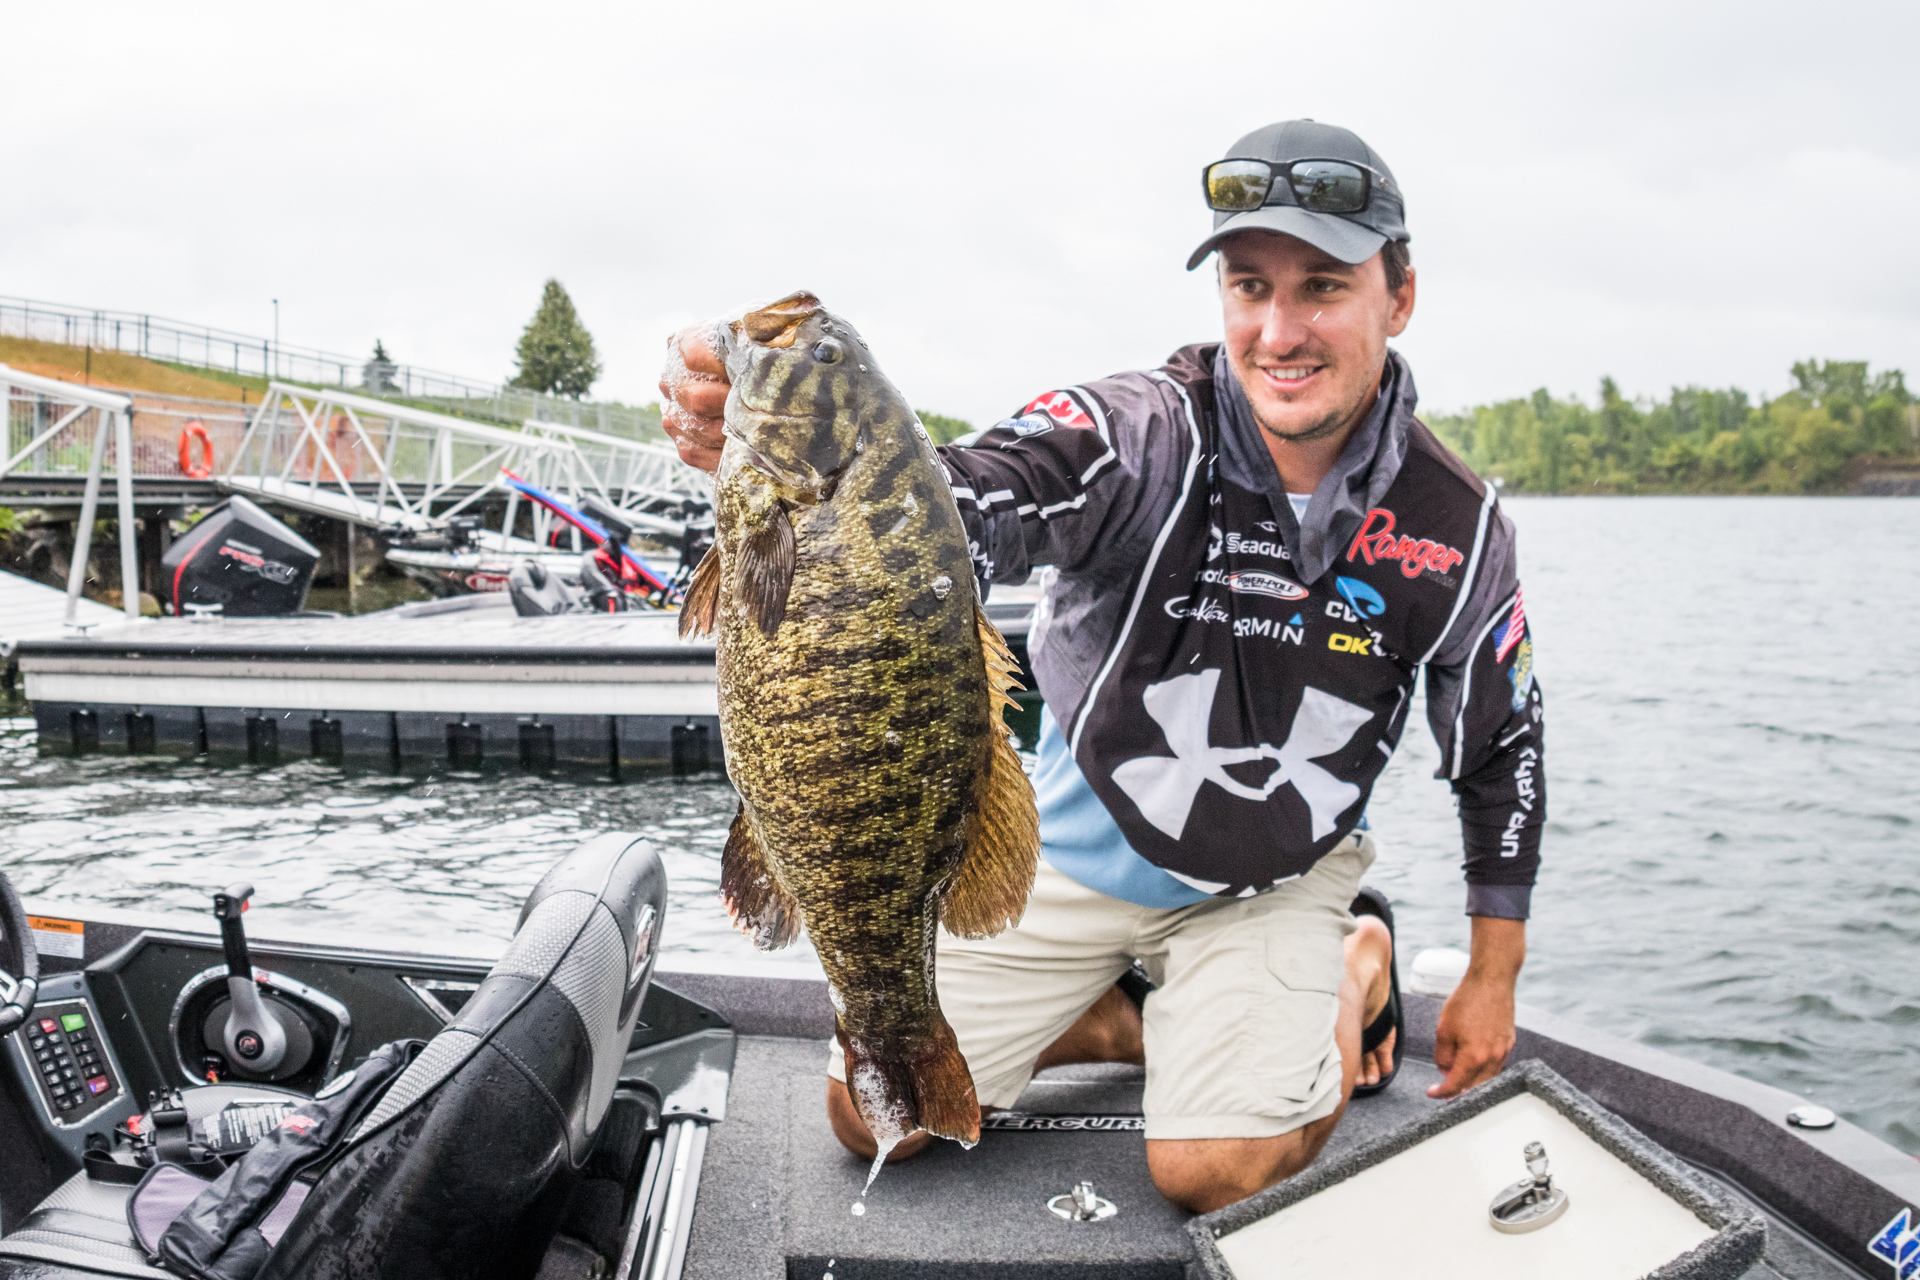 Q+A With Professional Angler and “Jersey Boy”, Adrian Avena - On